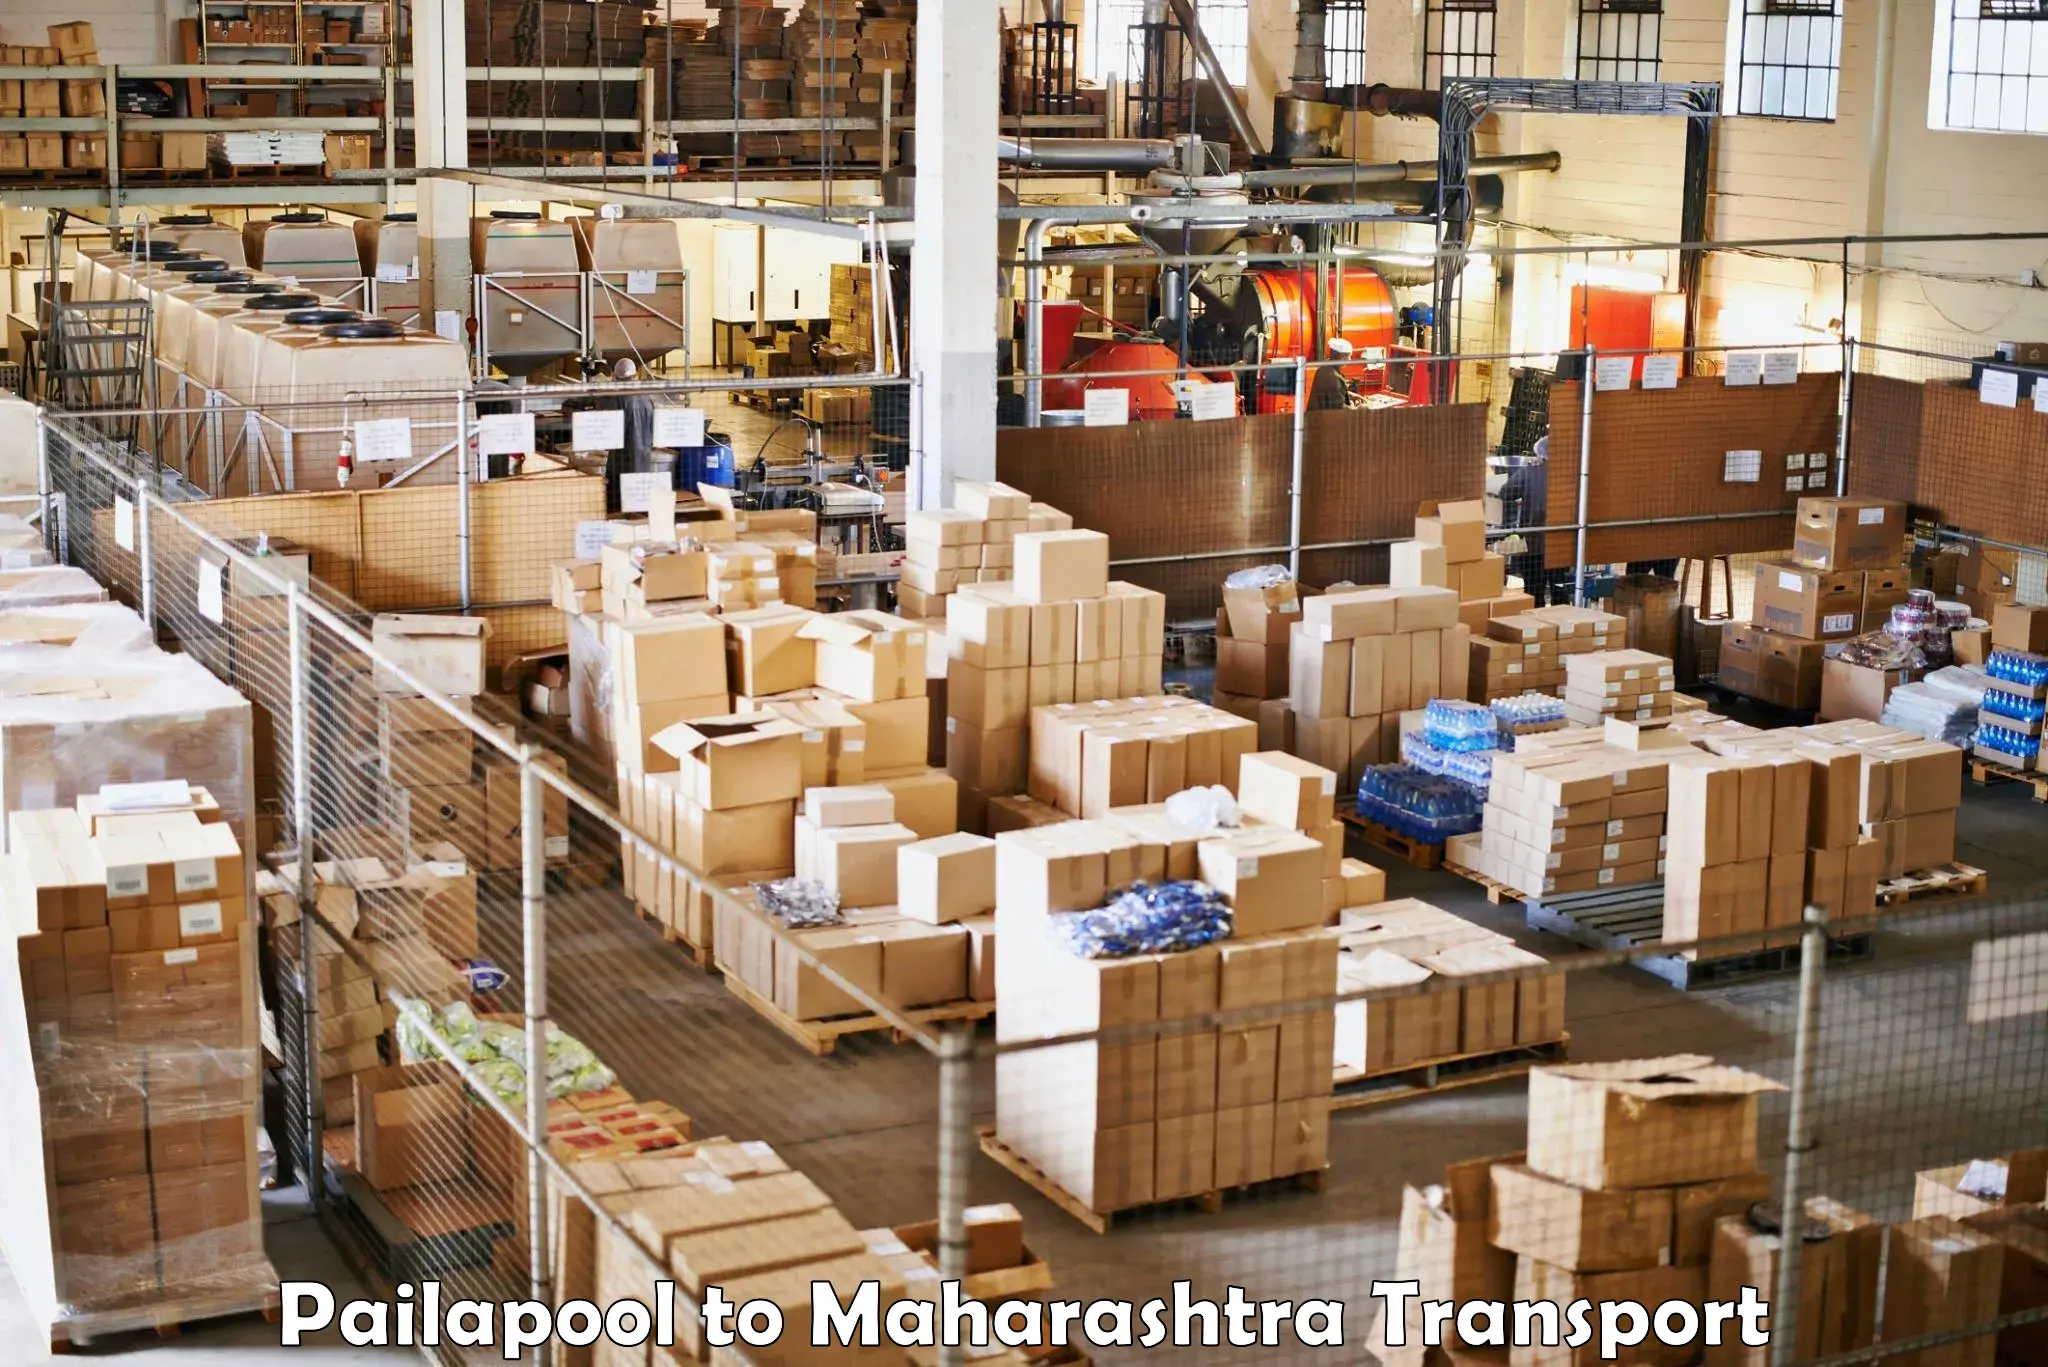 Air freight transport services Pailapool to Andheri